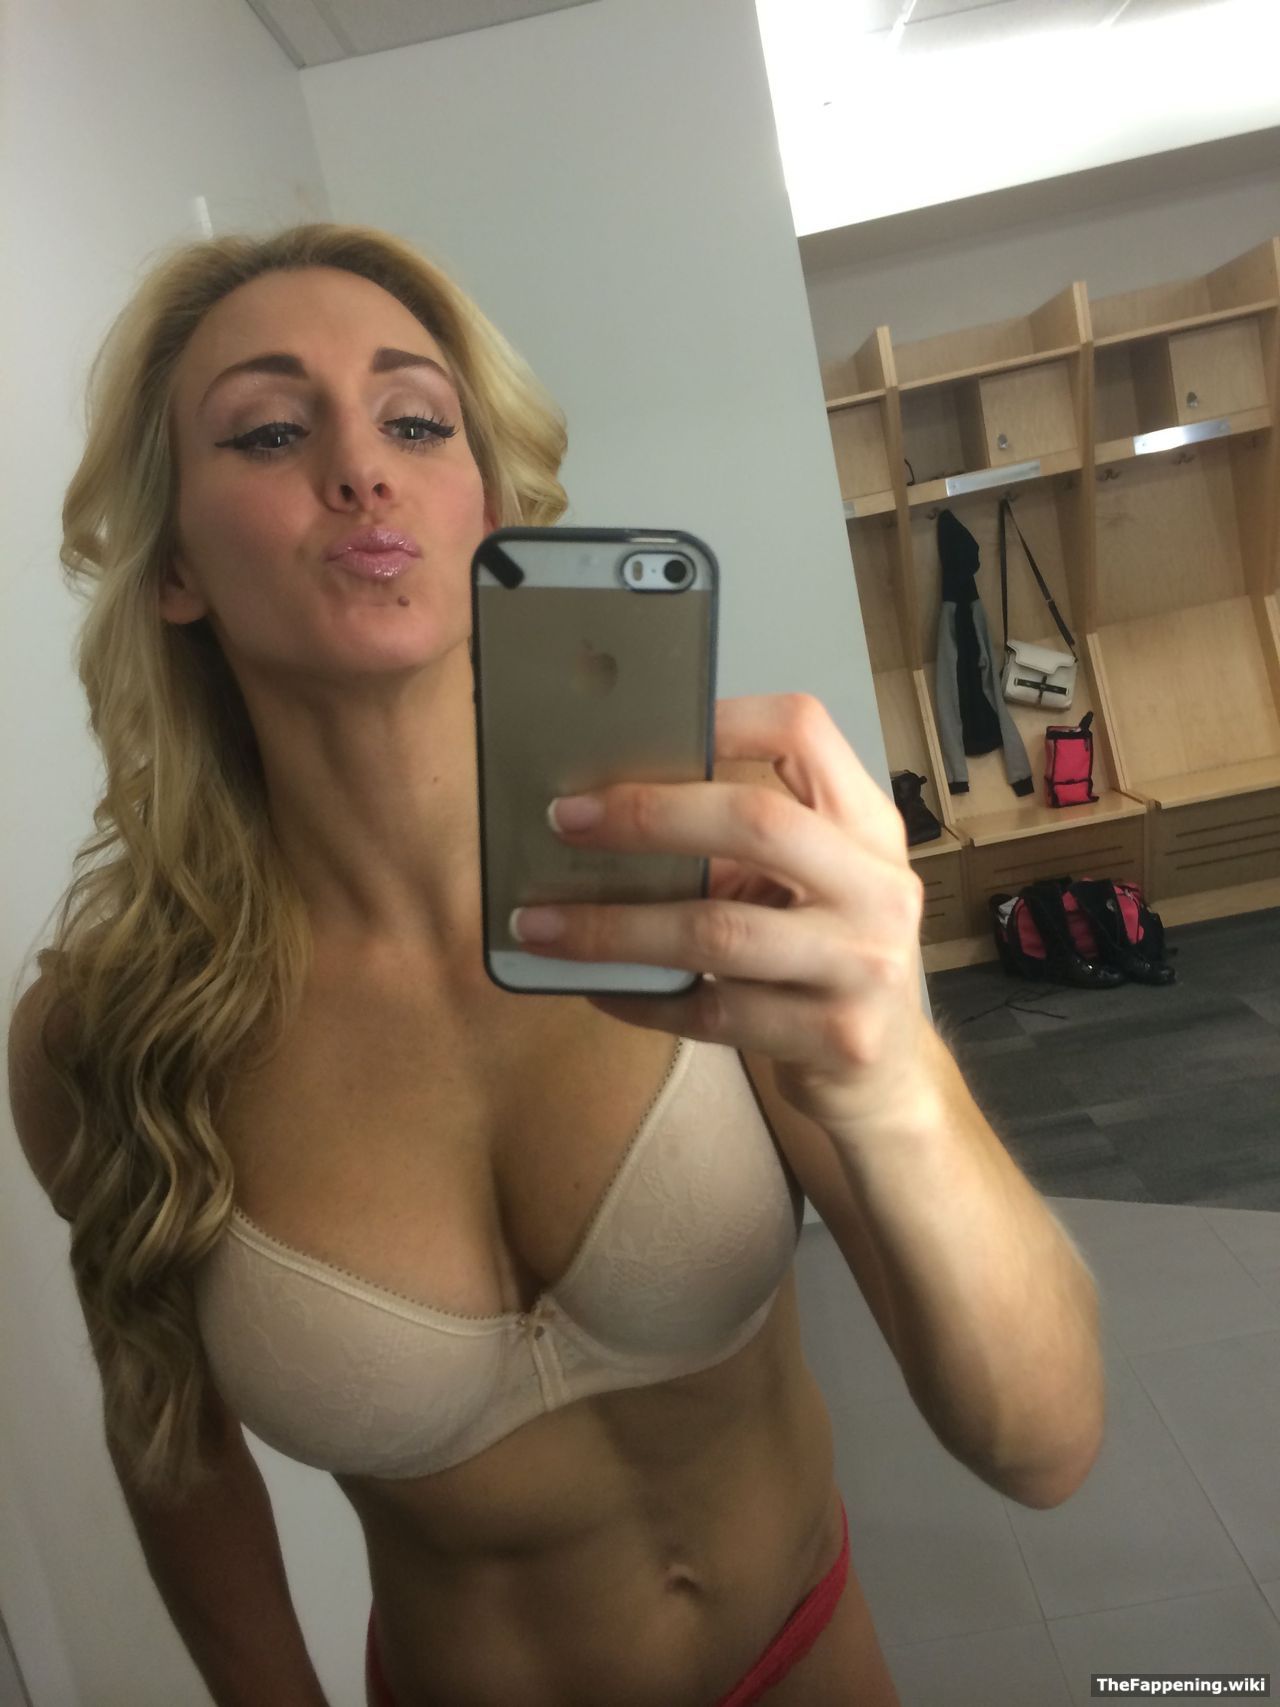 Charlet Fair Sex Video - Charlotte Flair (WWE) Nude Pics & Vids - The Fappening